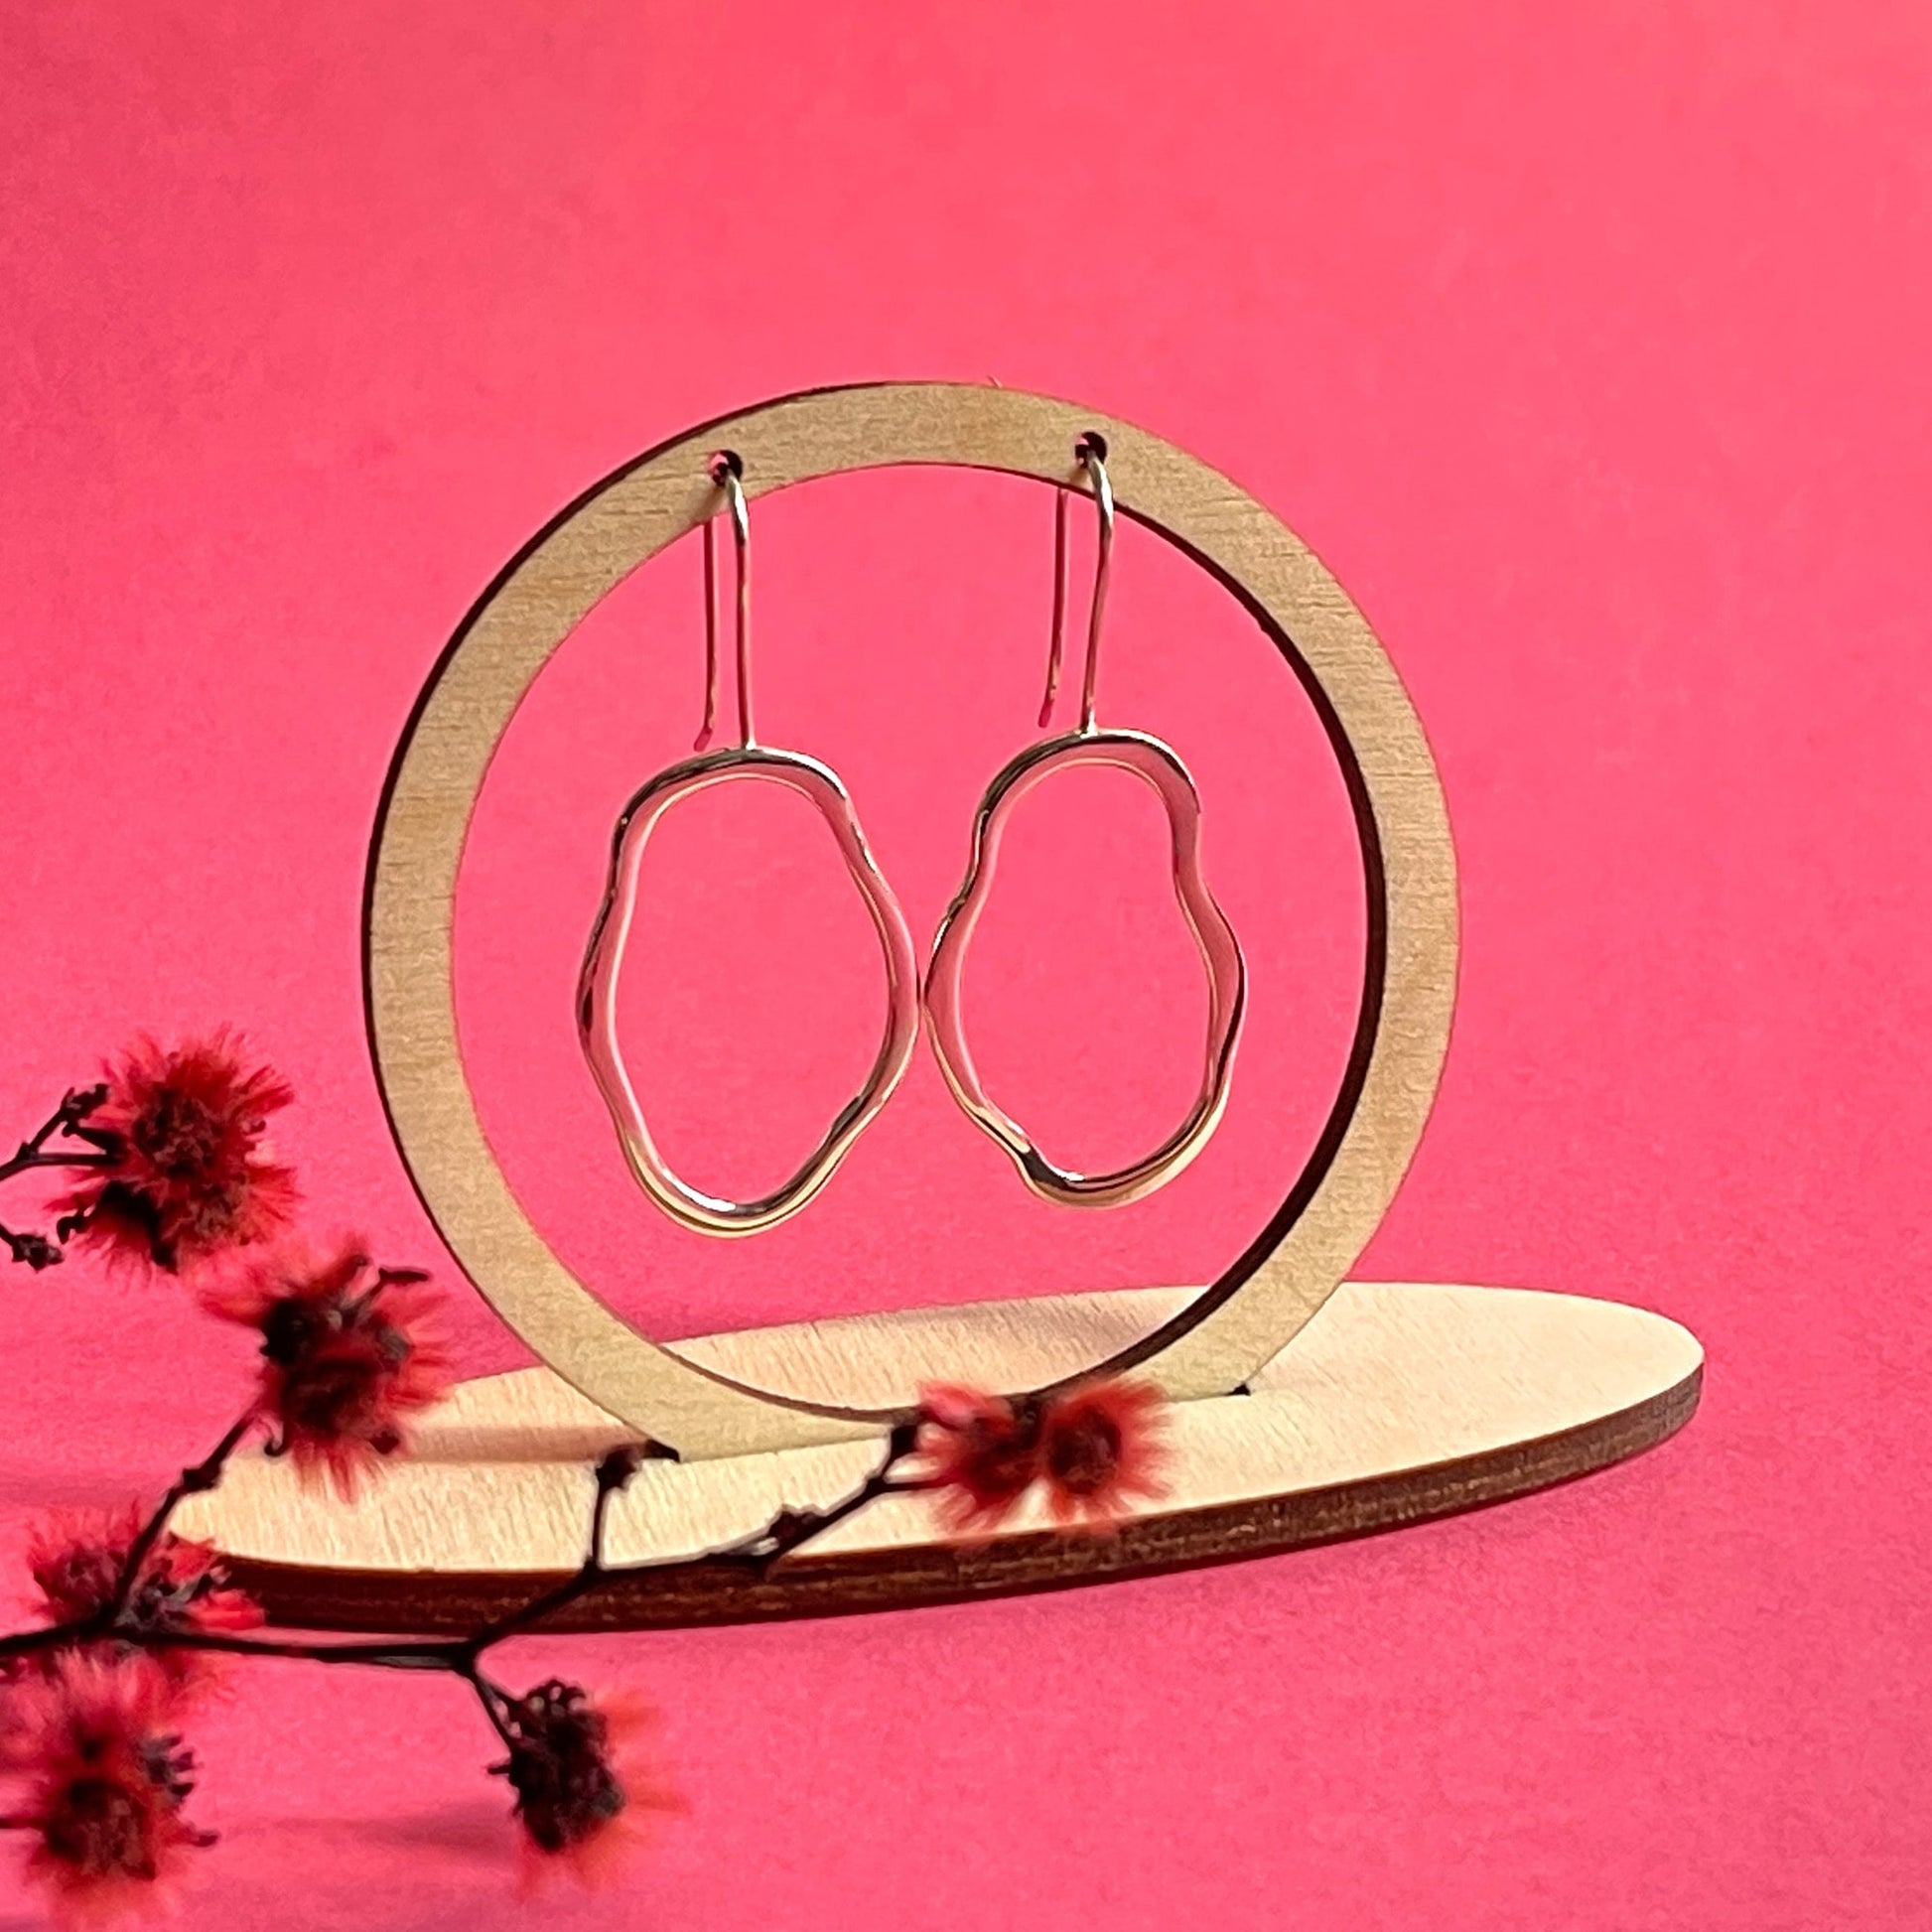 A pair of unique, abstract shaped sterling silver earrings, hanging from a wooden frame on a bright pink background. There is dyed red blossom in front of the frame. Handmade by Australian jeweller Rebecca Cordingley.